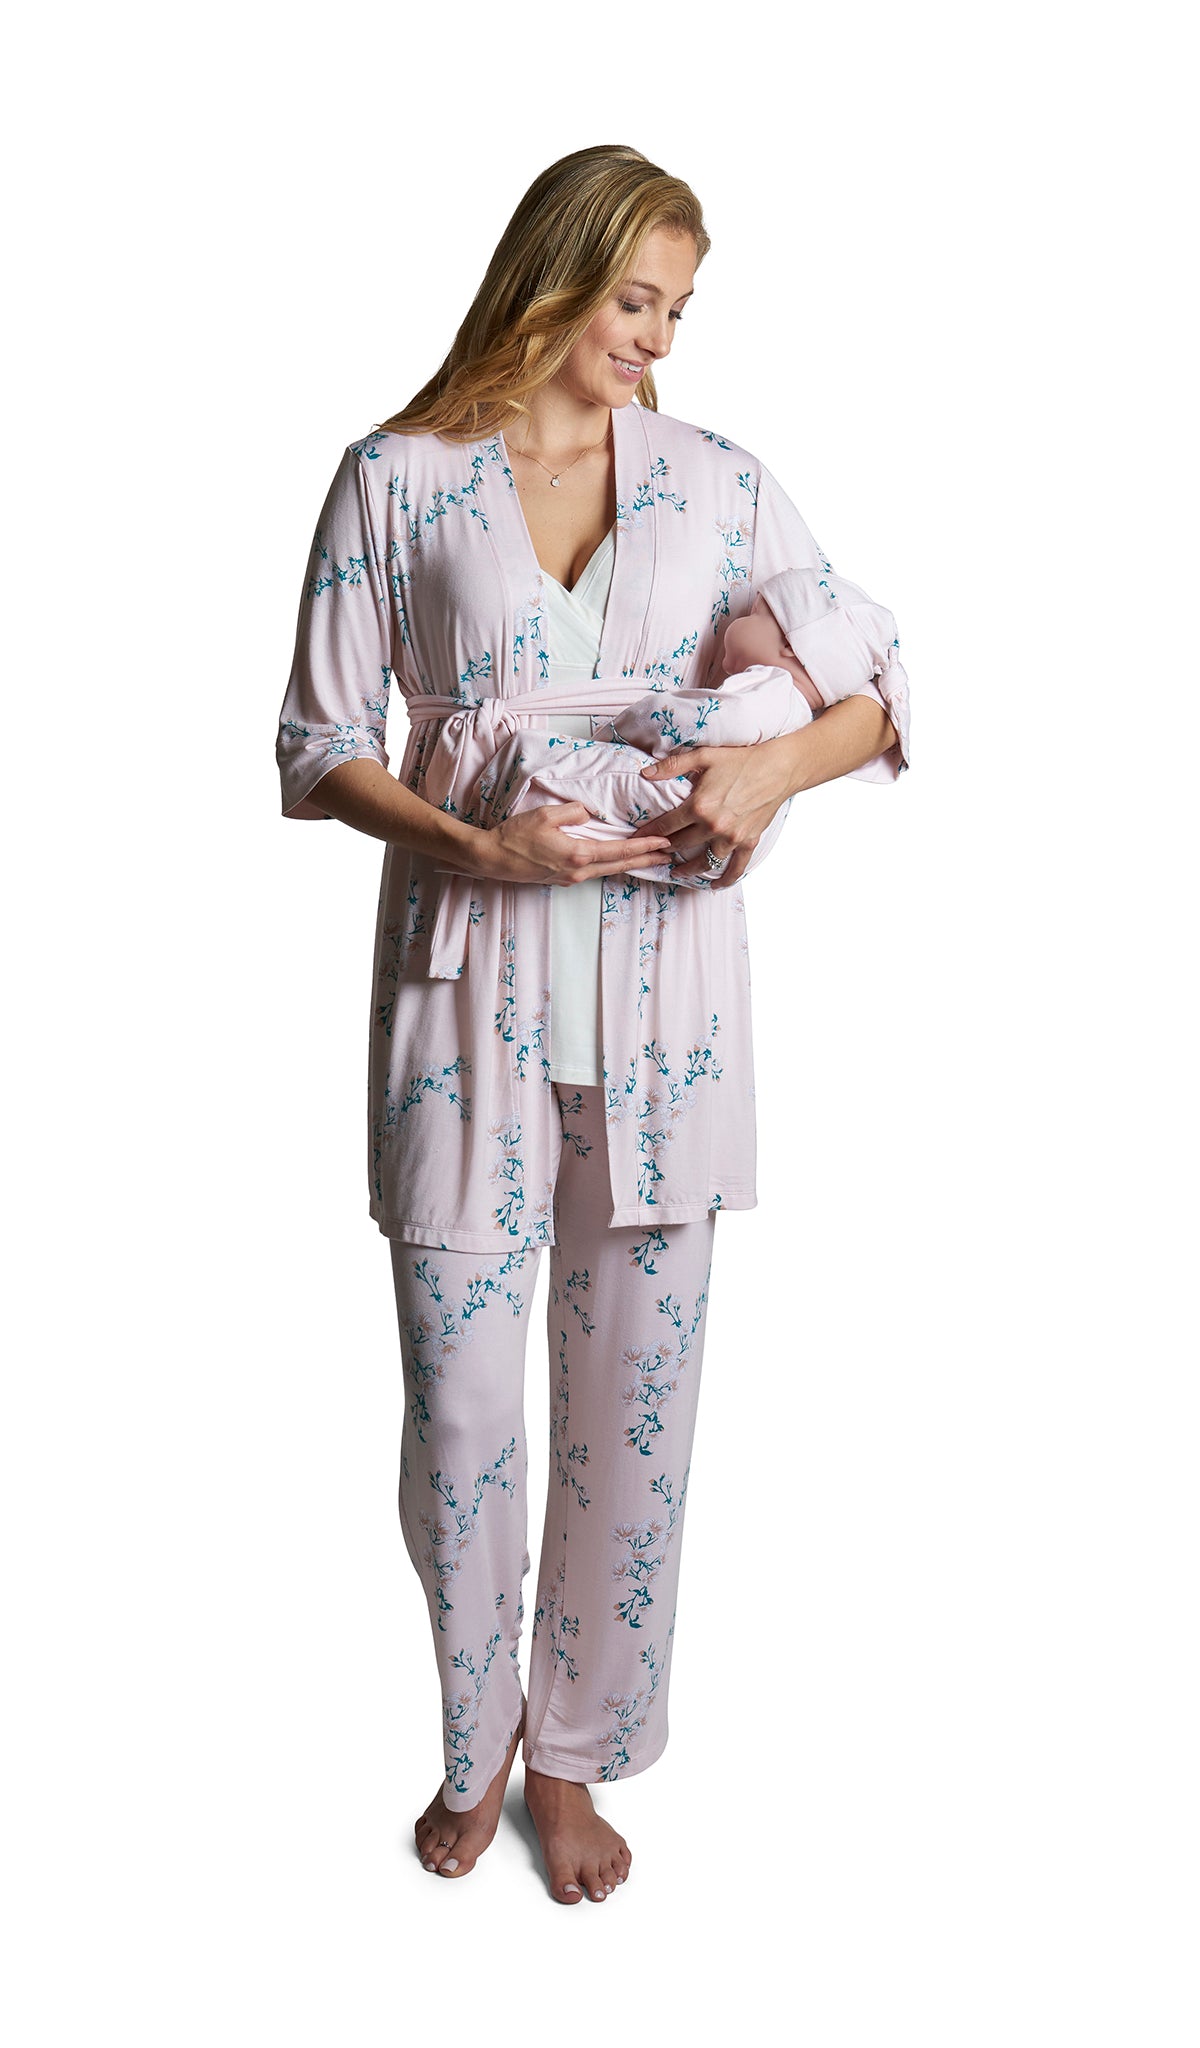 Lily Analise 5-Piece Set. Woman wearing 3/4 sleeve robe, tank top and pant while holding a baby wearing baby gown and knotted baby hat.